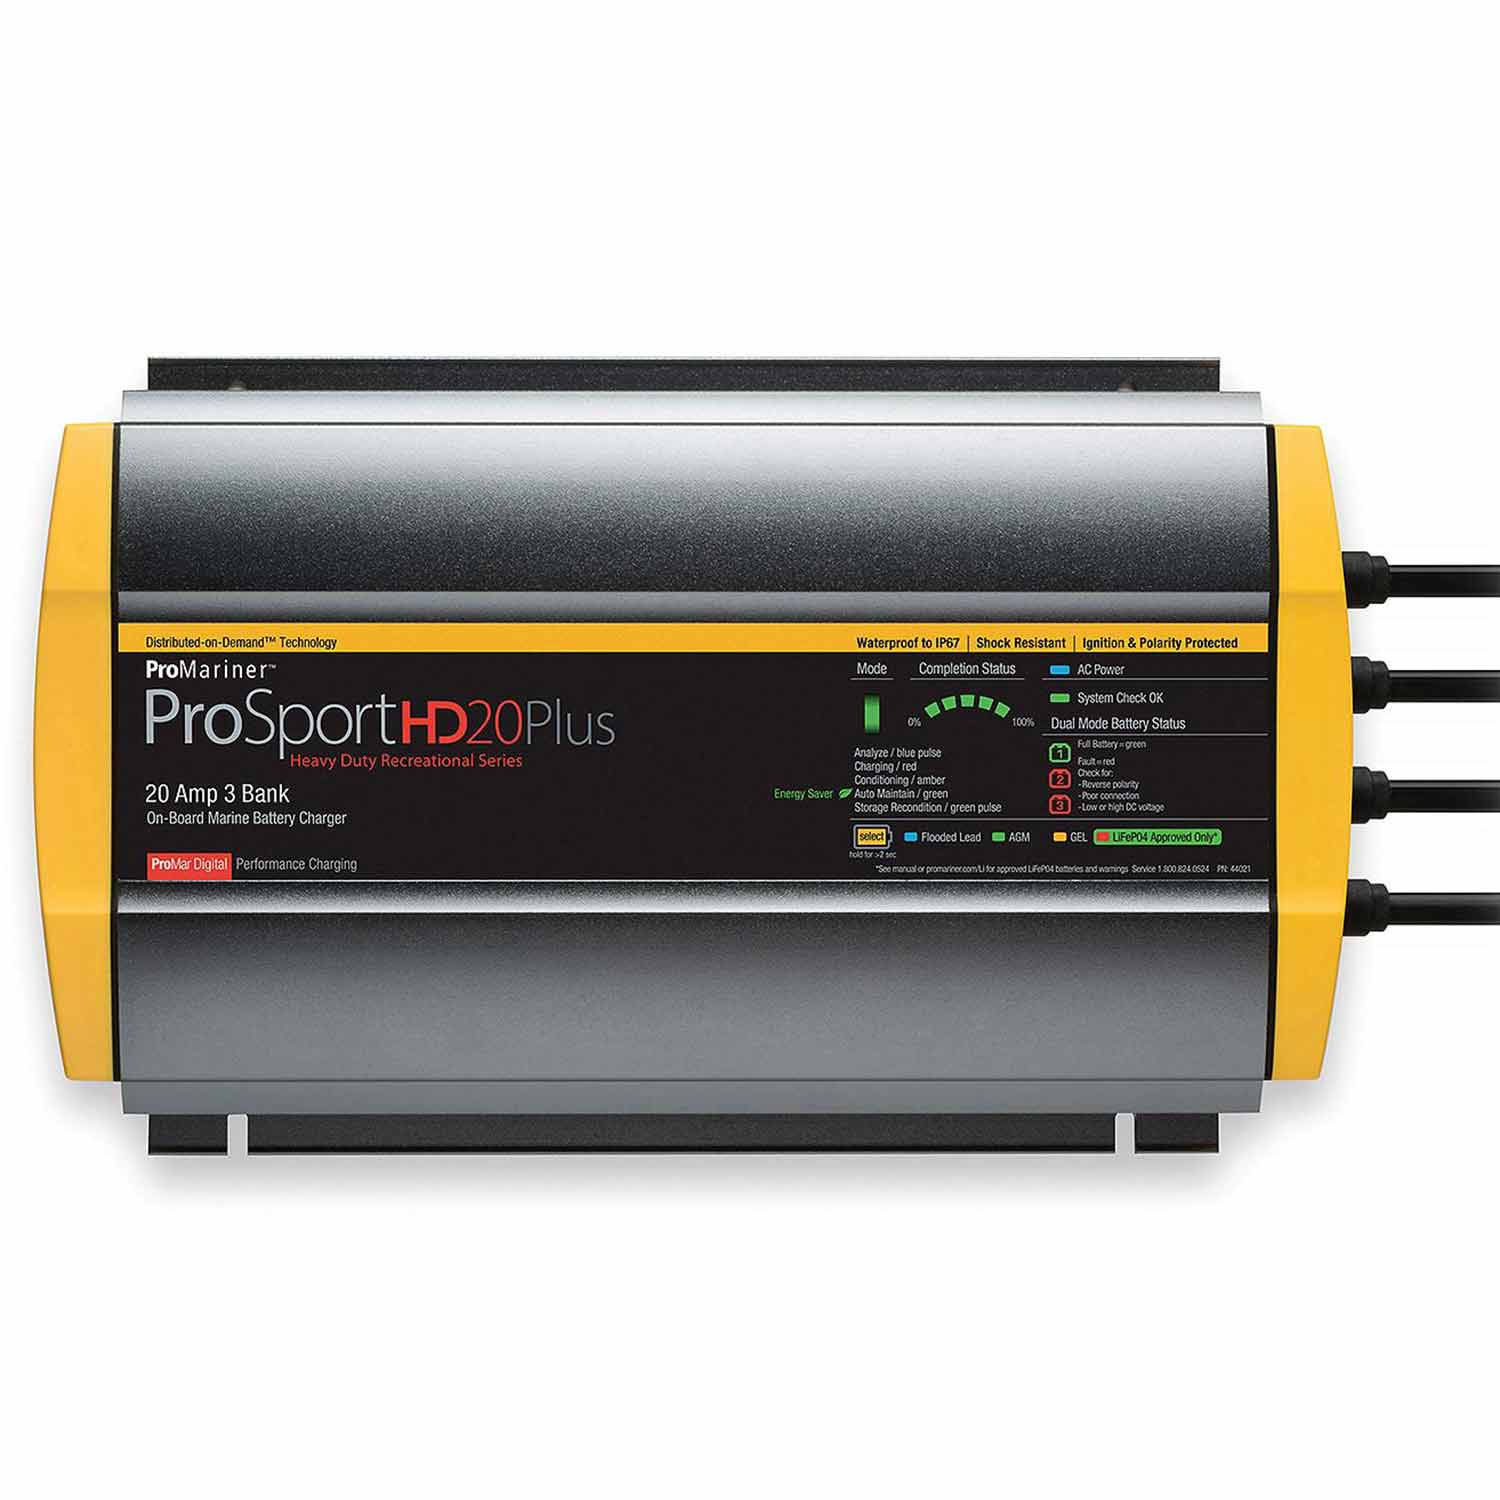 PROMARINER ProSportHD20 Plus Onboard Marine Battery Charger, 20